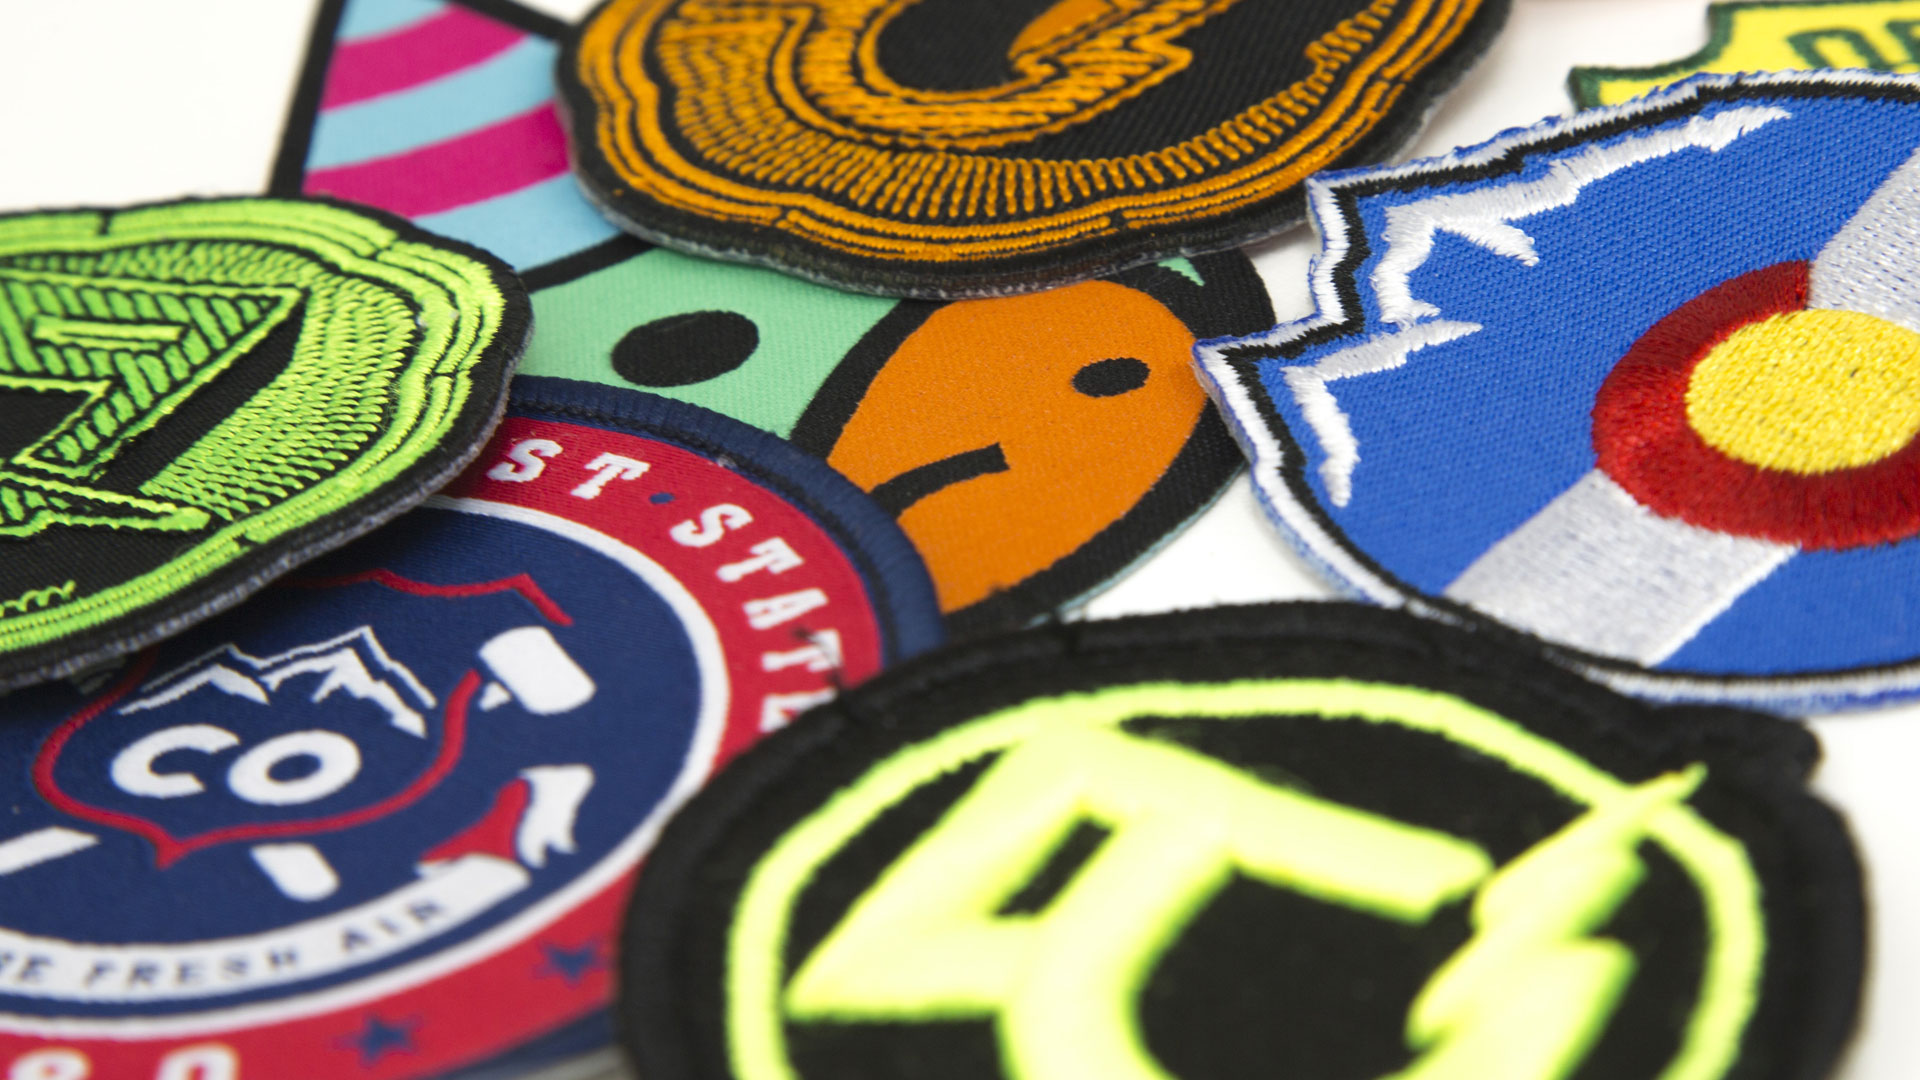 PATCHES & PINS